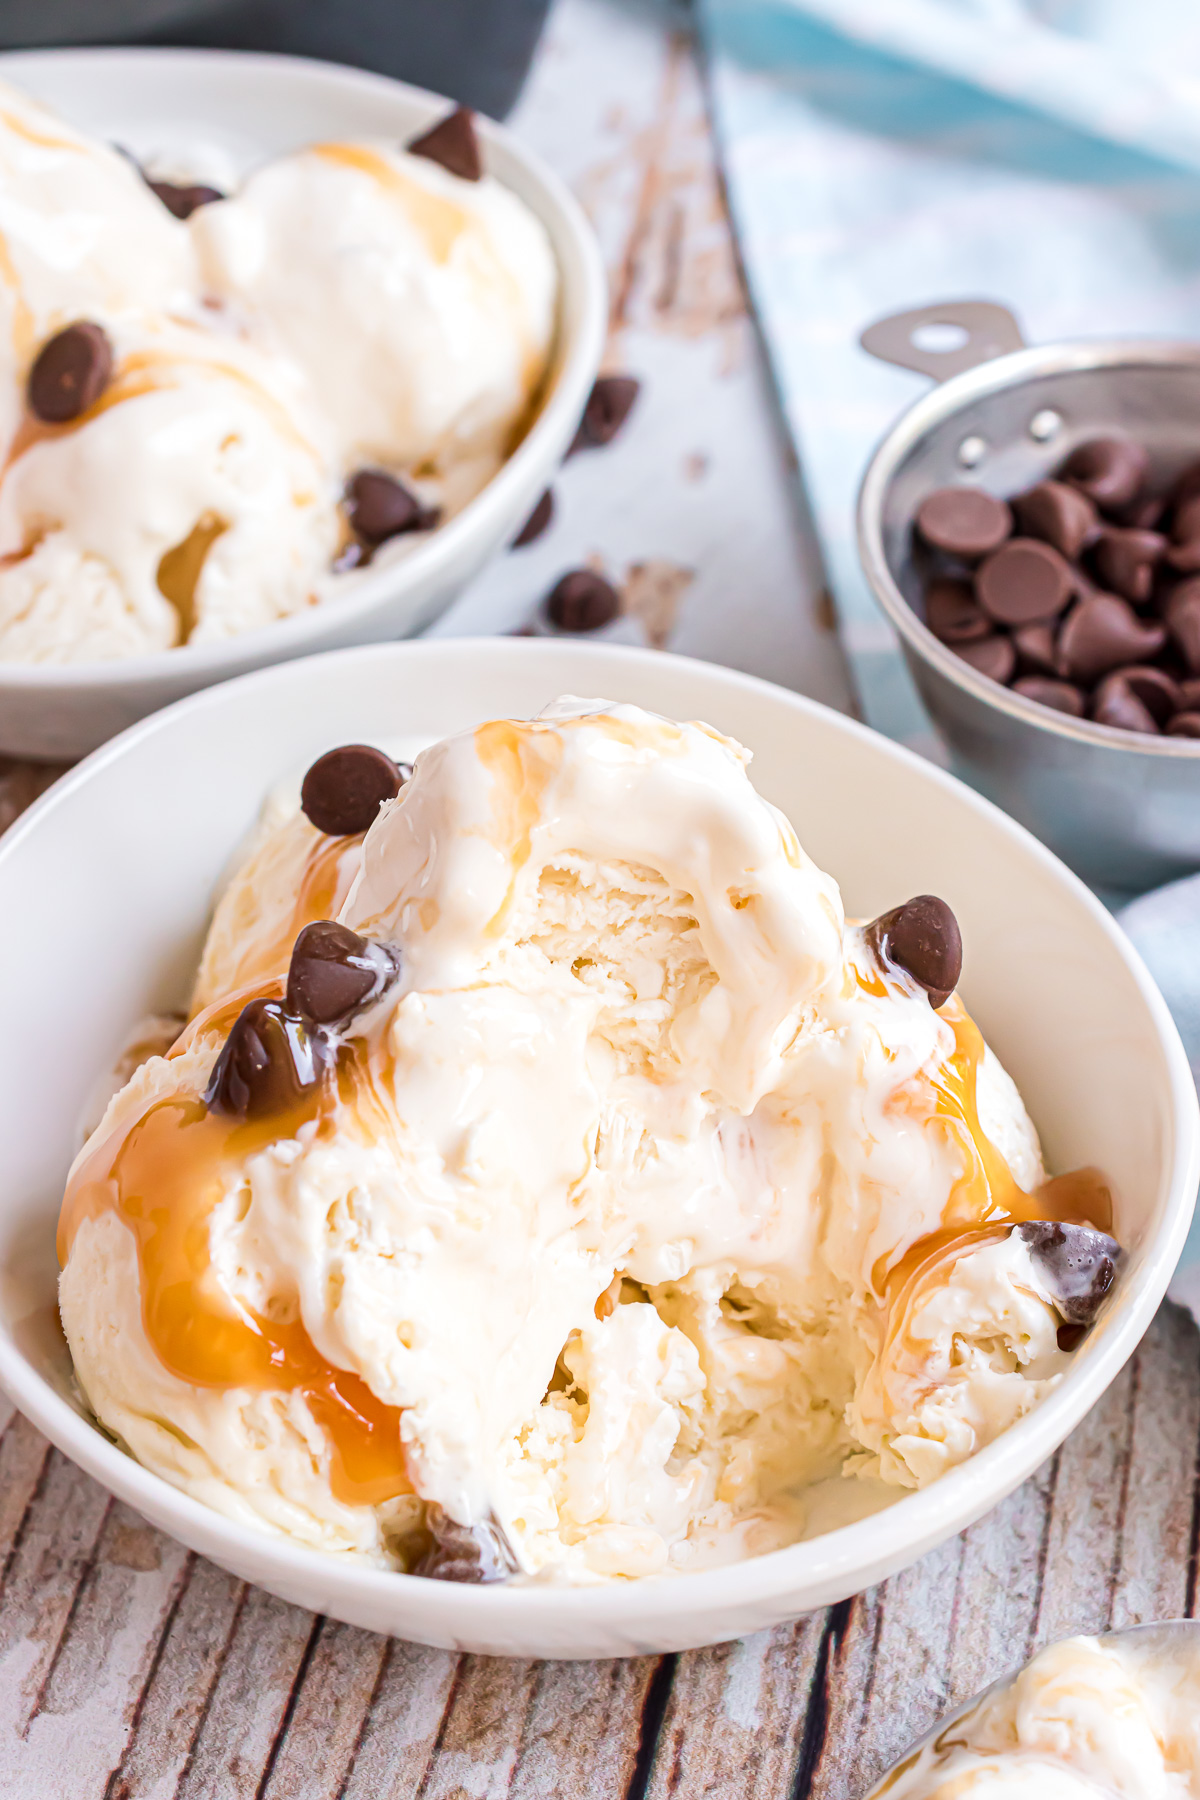 A bowl of sweetened condensed milk ice cream with a large scoop taken out of the side of the serving. The ice cream is drizzled with caramel sauce and chocolate chips.